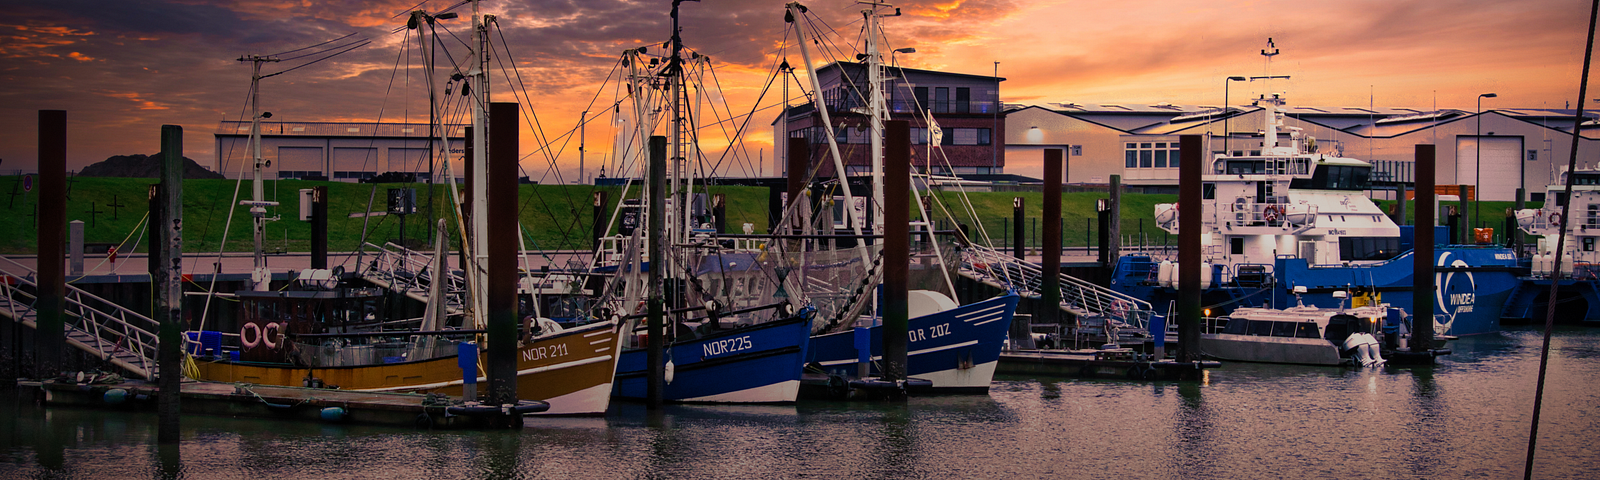 A line of fishing boats waiting in a harbour at sunset.